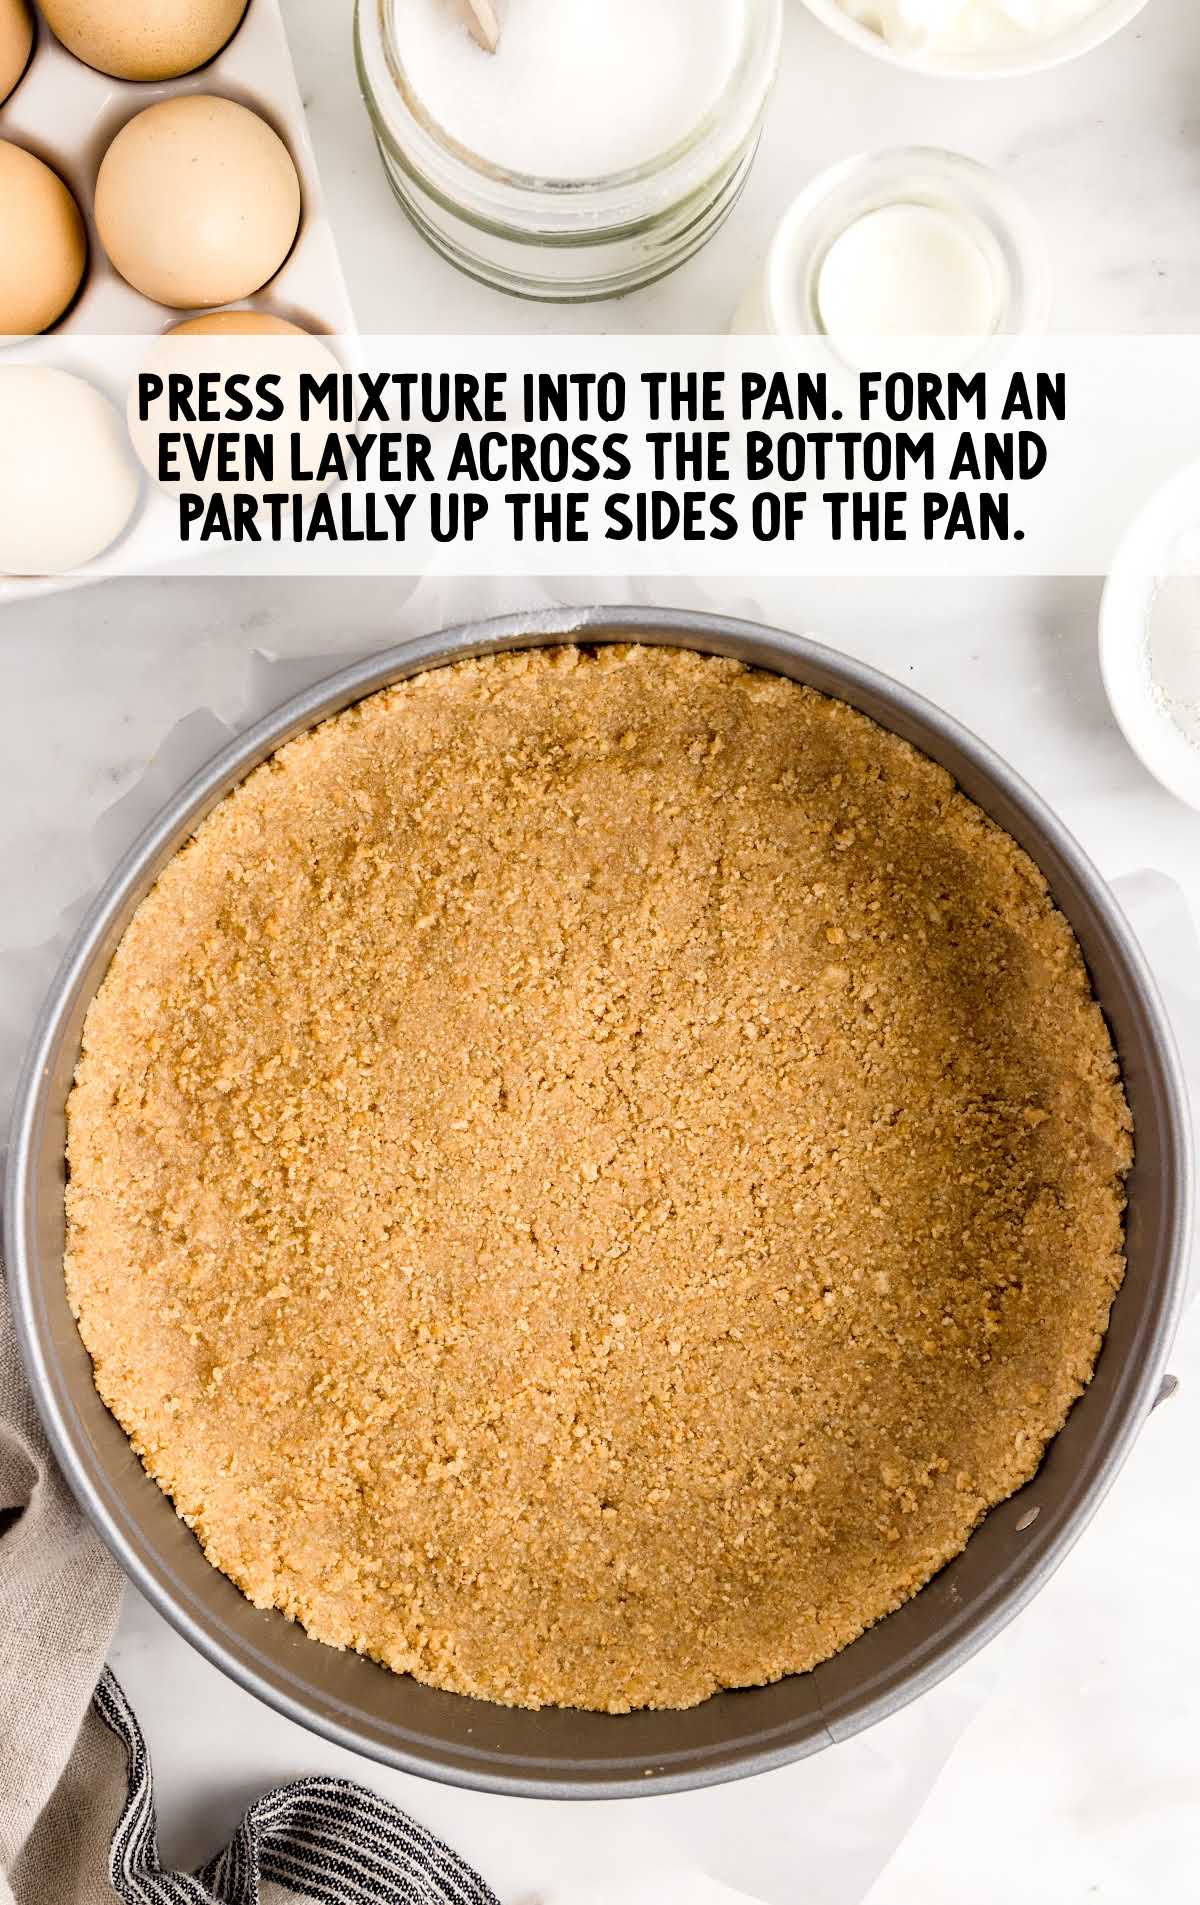 graham cracker mixture pressed into the bottom of a pan